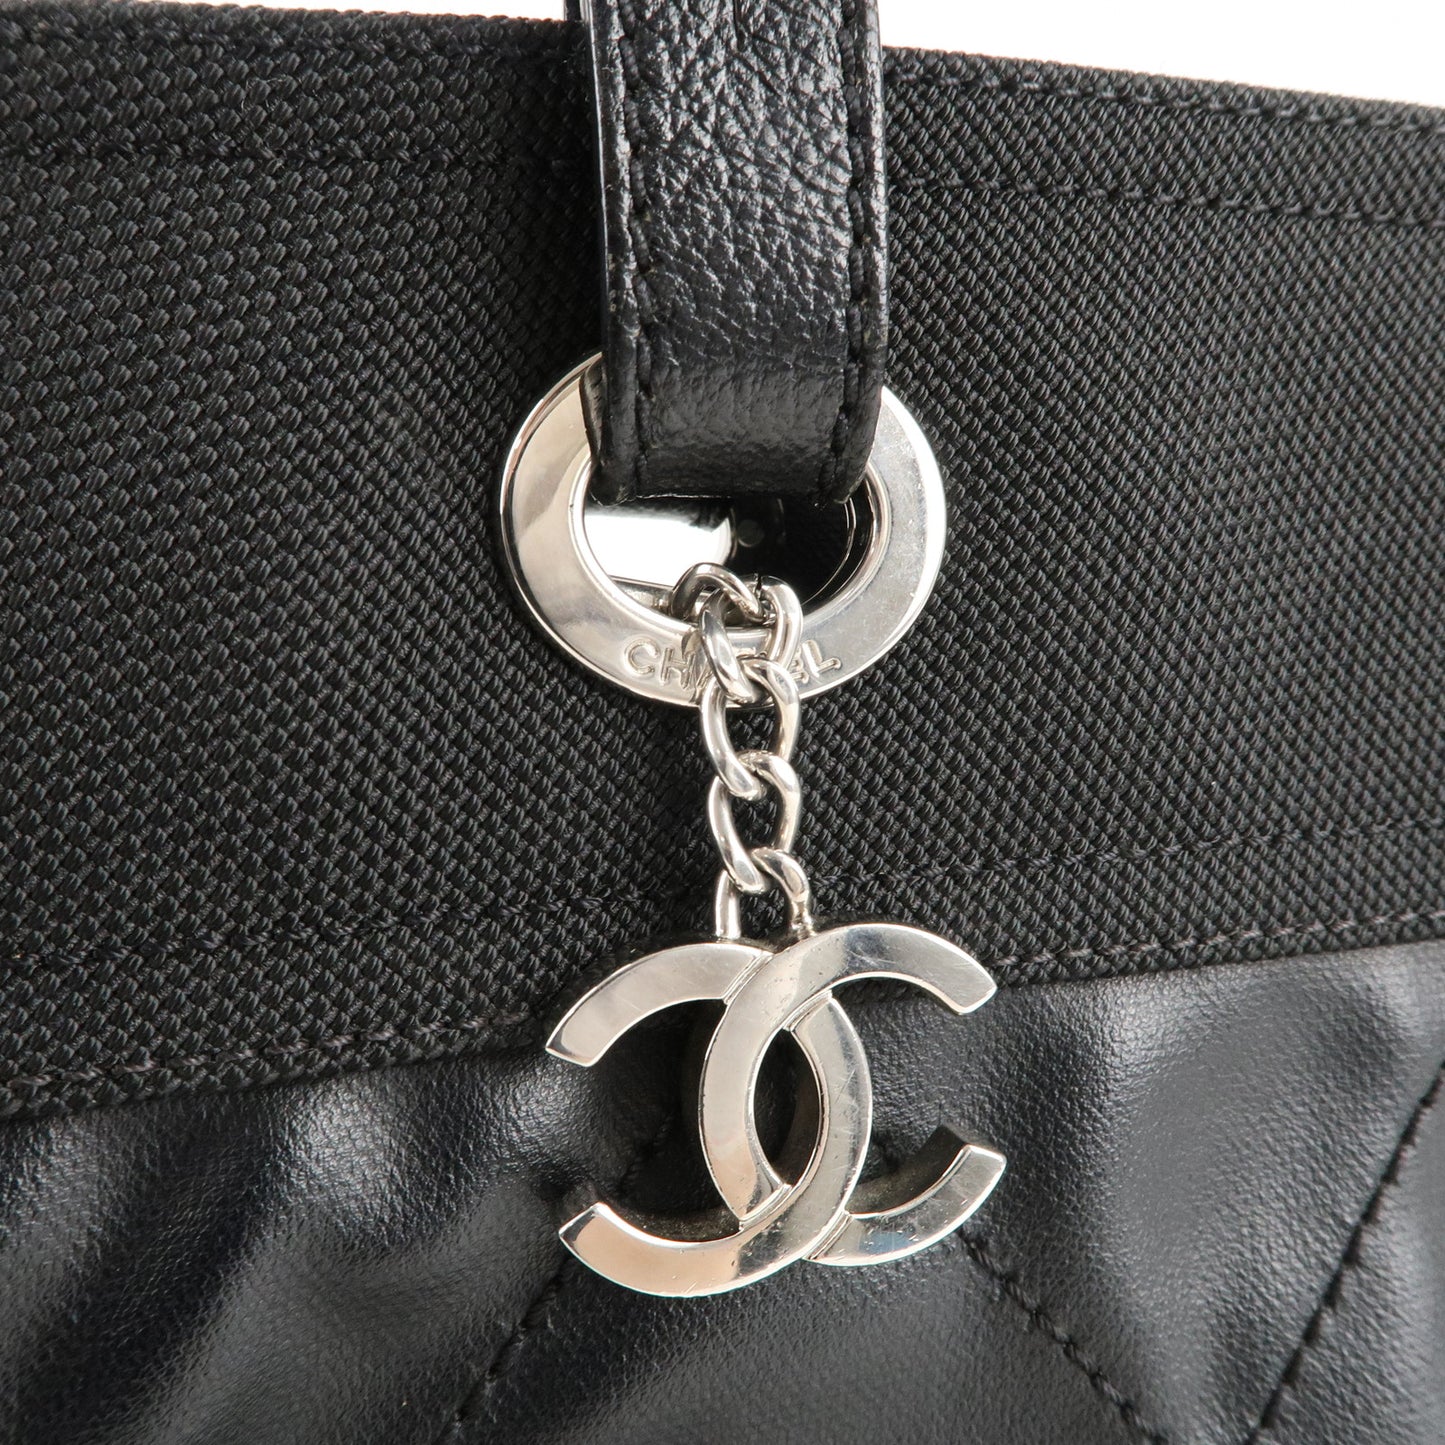 CHANEL Paris Biarritz MM Coated Canvas Leather Tote Bag A34209